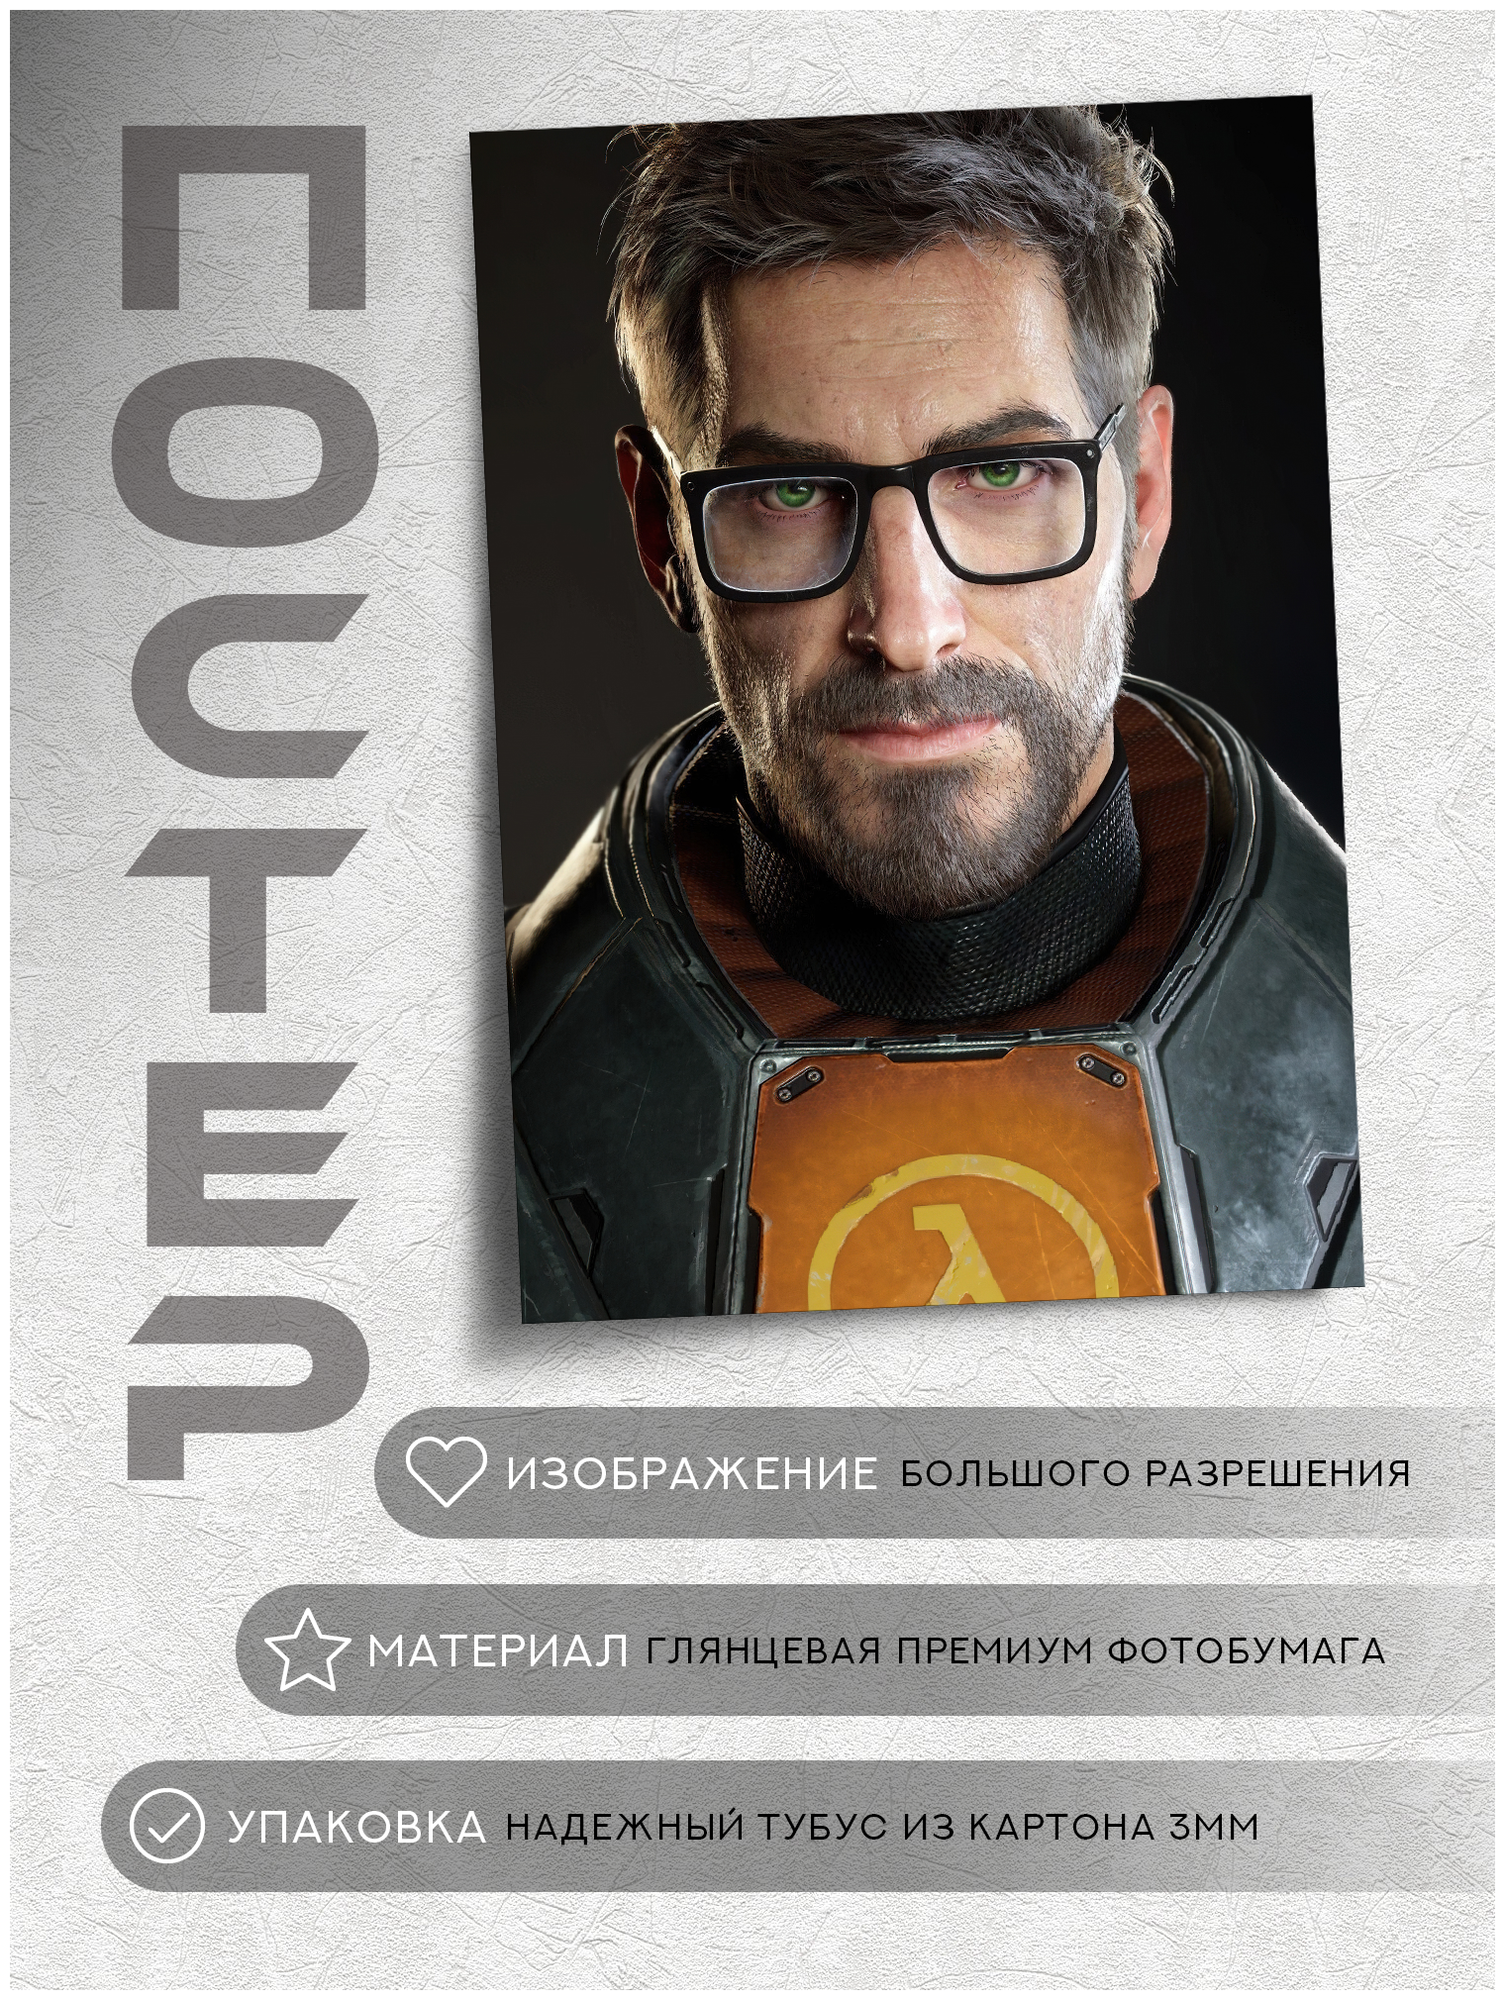 Download failed because you may not have purchased this app half life фото 38